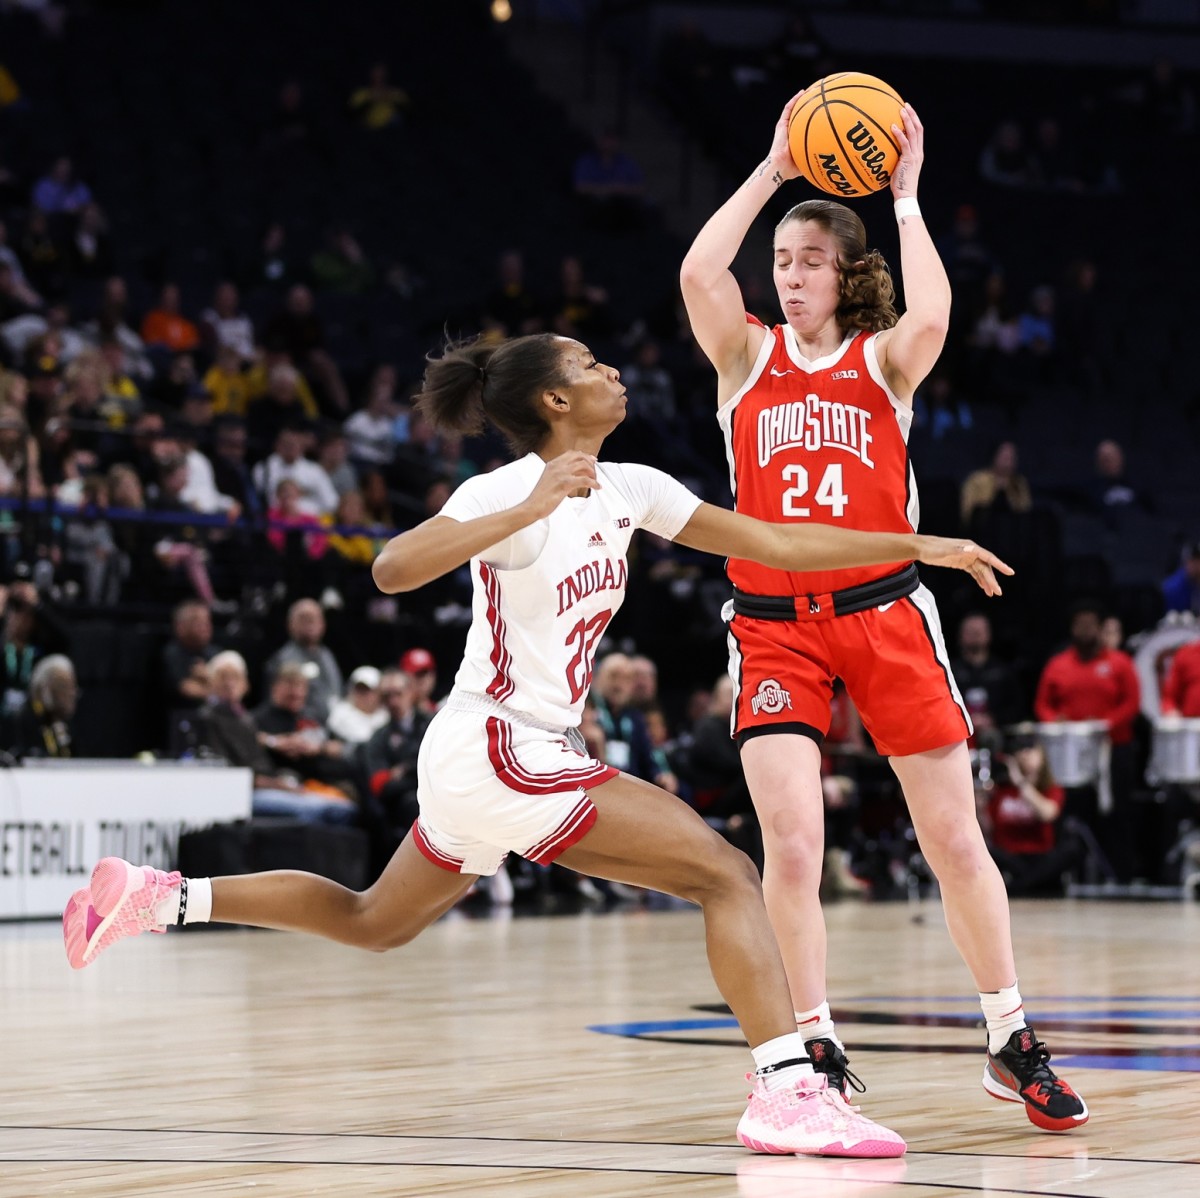 Mar 4, 2023; Minneapolis, Minn., USA; Ohio State Buckeyes guard Taylor Mikesell (24) looks to pass while Indiana Hoosiers guard Chloe Moore-McNeil (22) defends during the first half at Target Center.